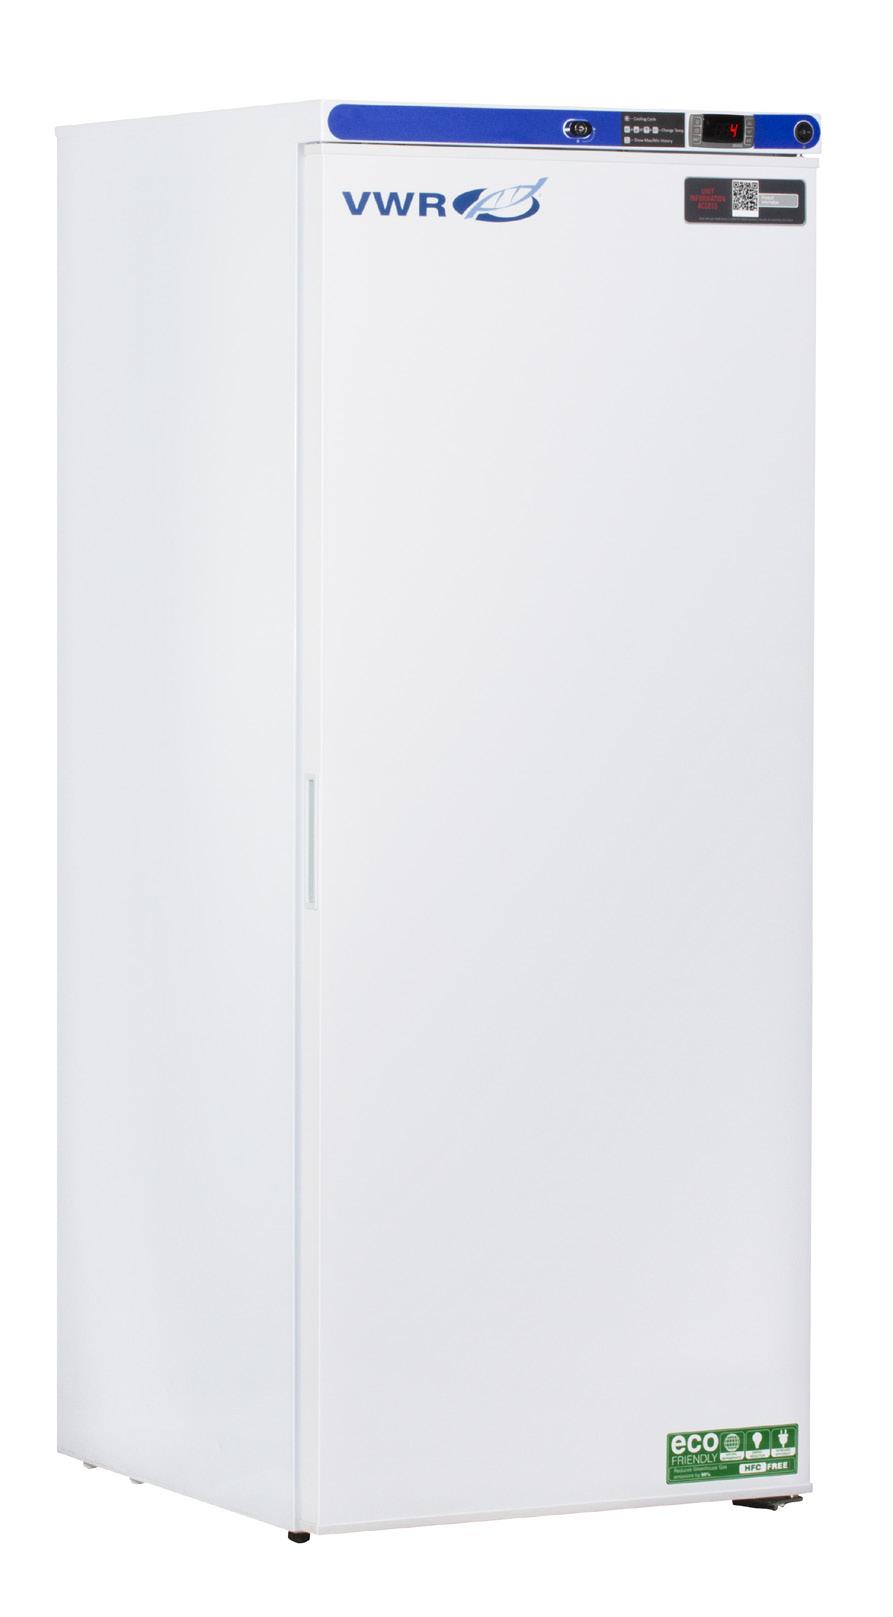 VWR SERIES VWR COMPACT LABORATORY REFRIGERATORS 1 to 10 C Uniform forced air Single glass and solid door configurations available 2/5 Warranty Two-year parts and labor warranty, five years on